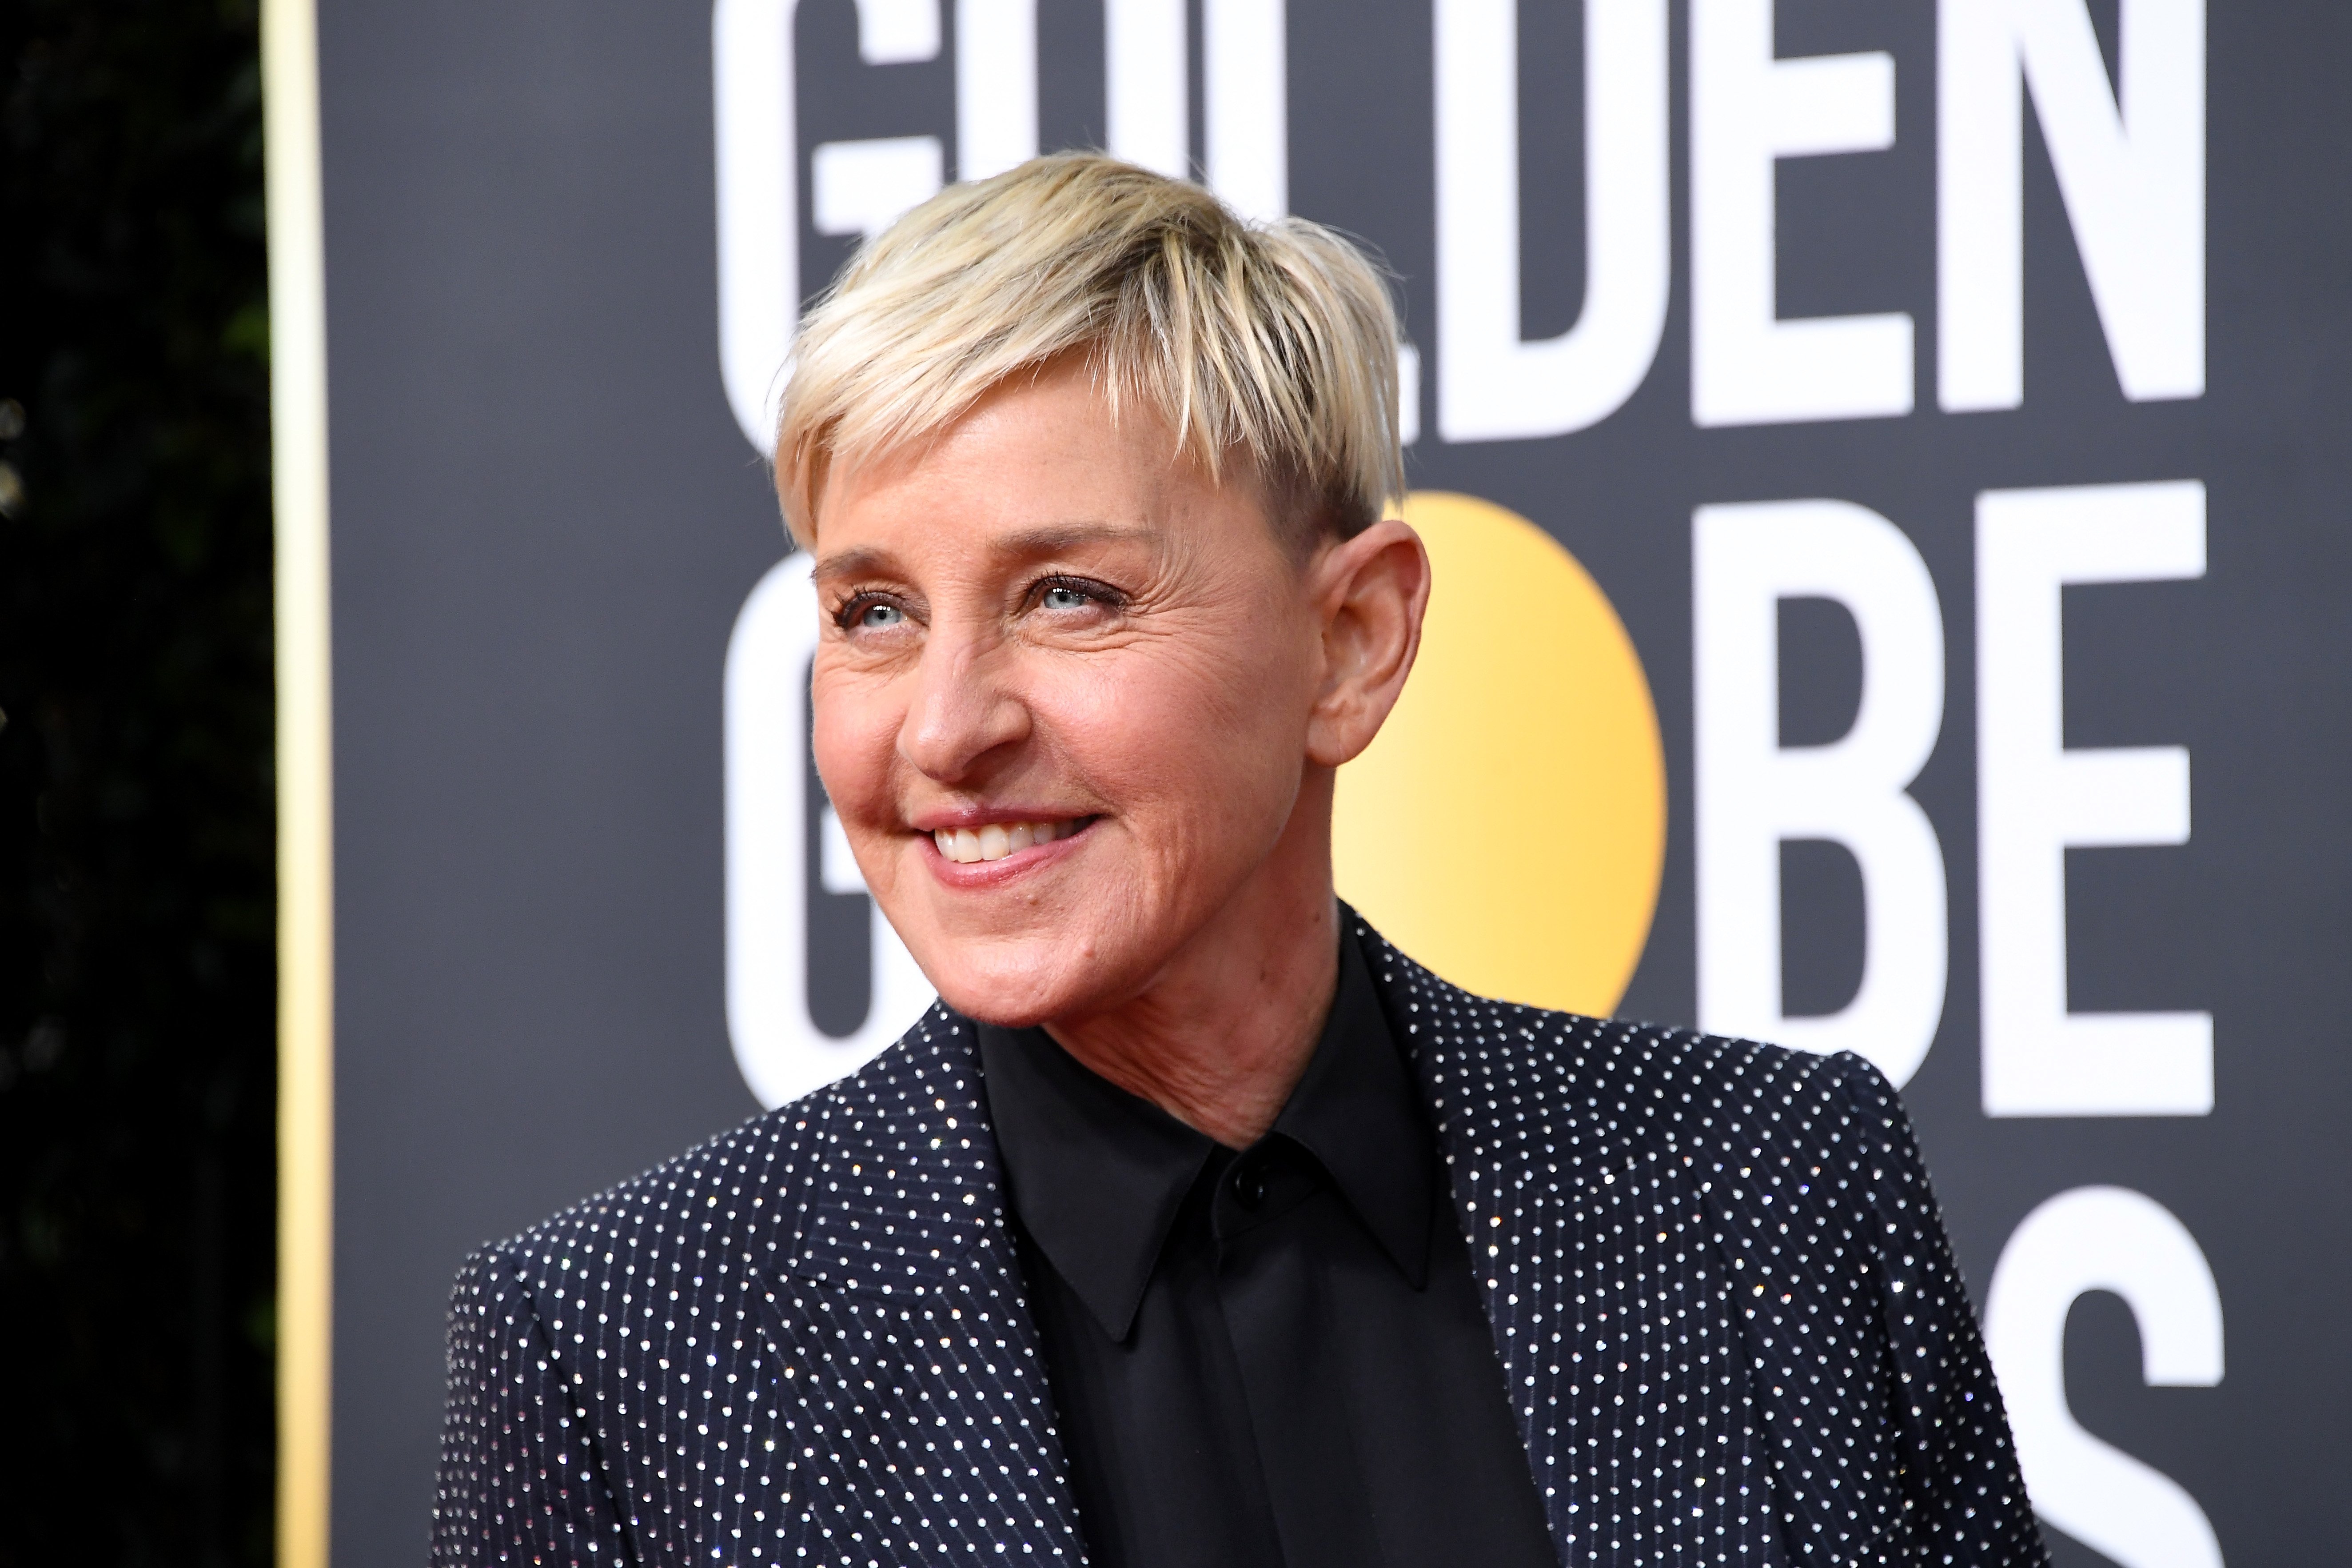 Ellen DeGeneres attends the 77th Annual Golden Globe Awards on January 05, 2020. | Photo: Getty Images